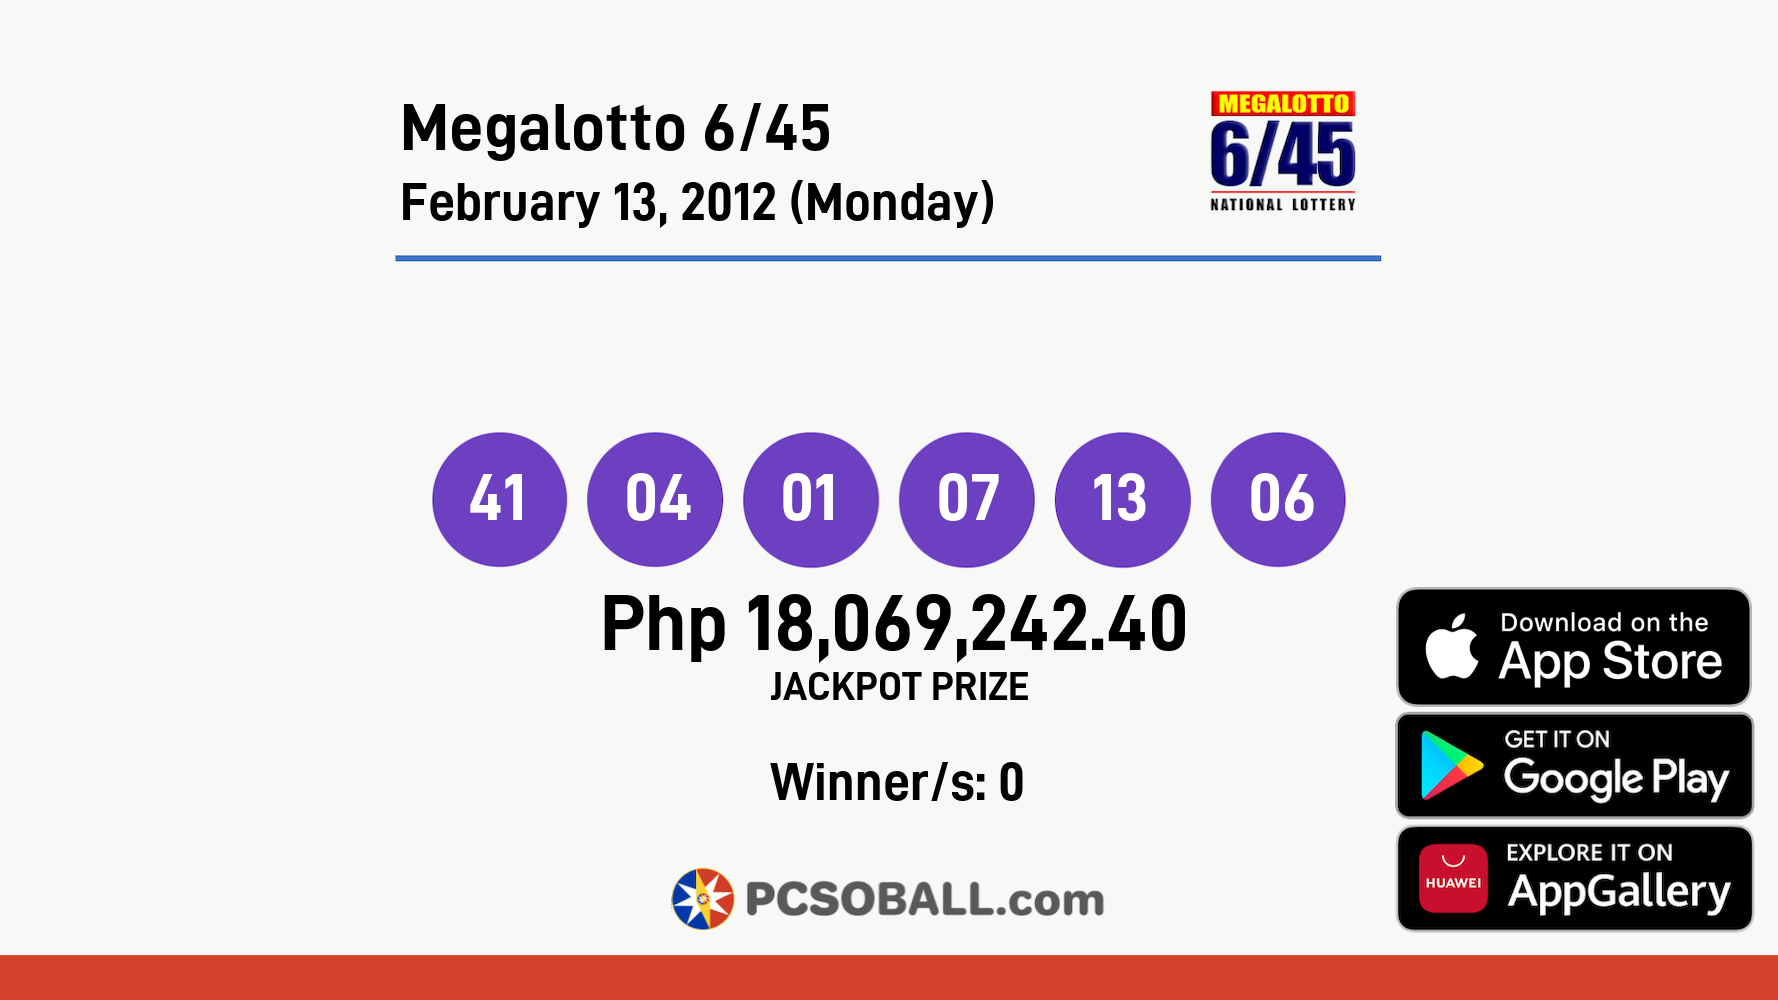 Megalotto 6/45 February 13, 2012 (Monday) Result